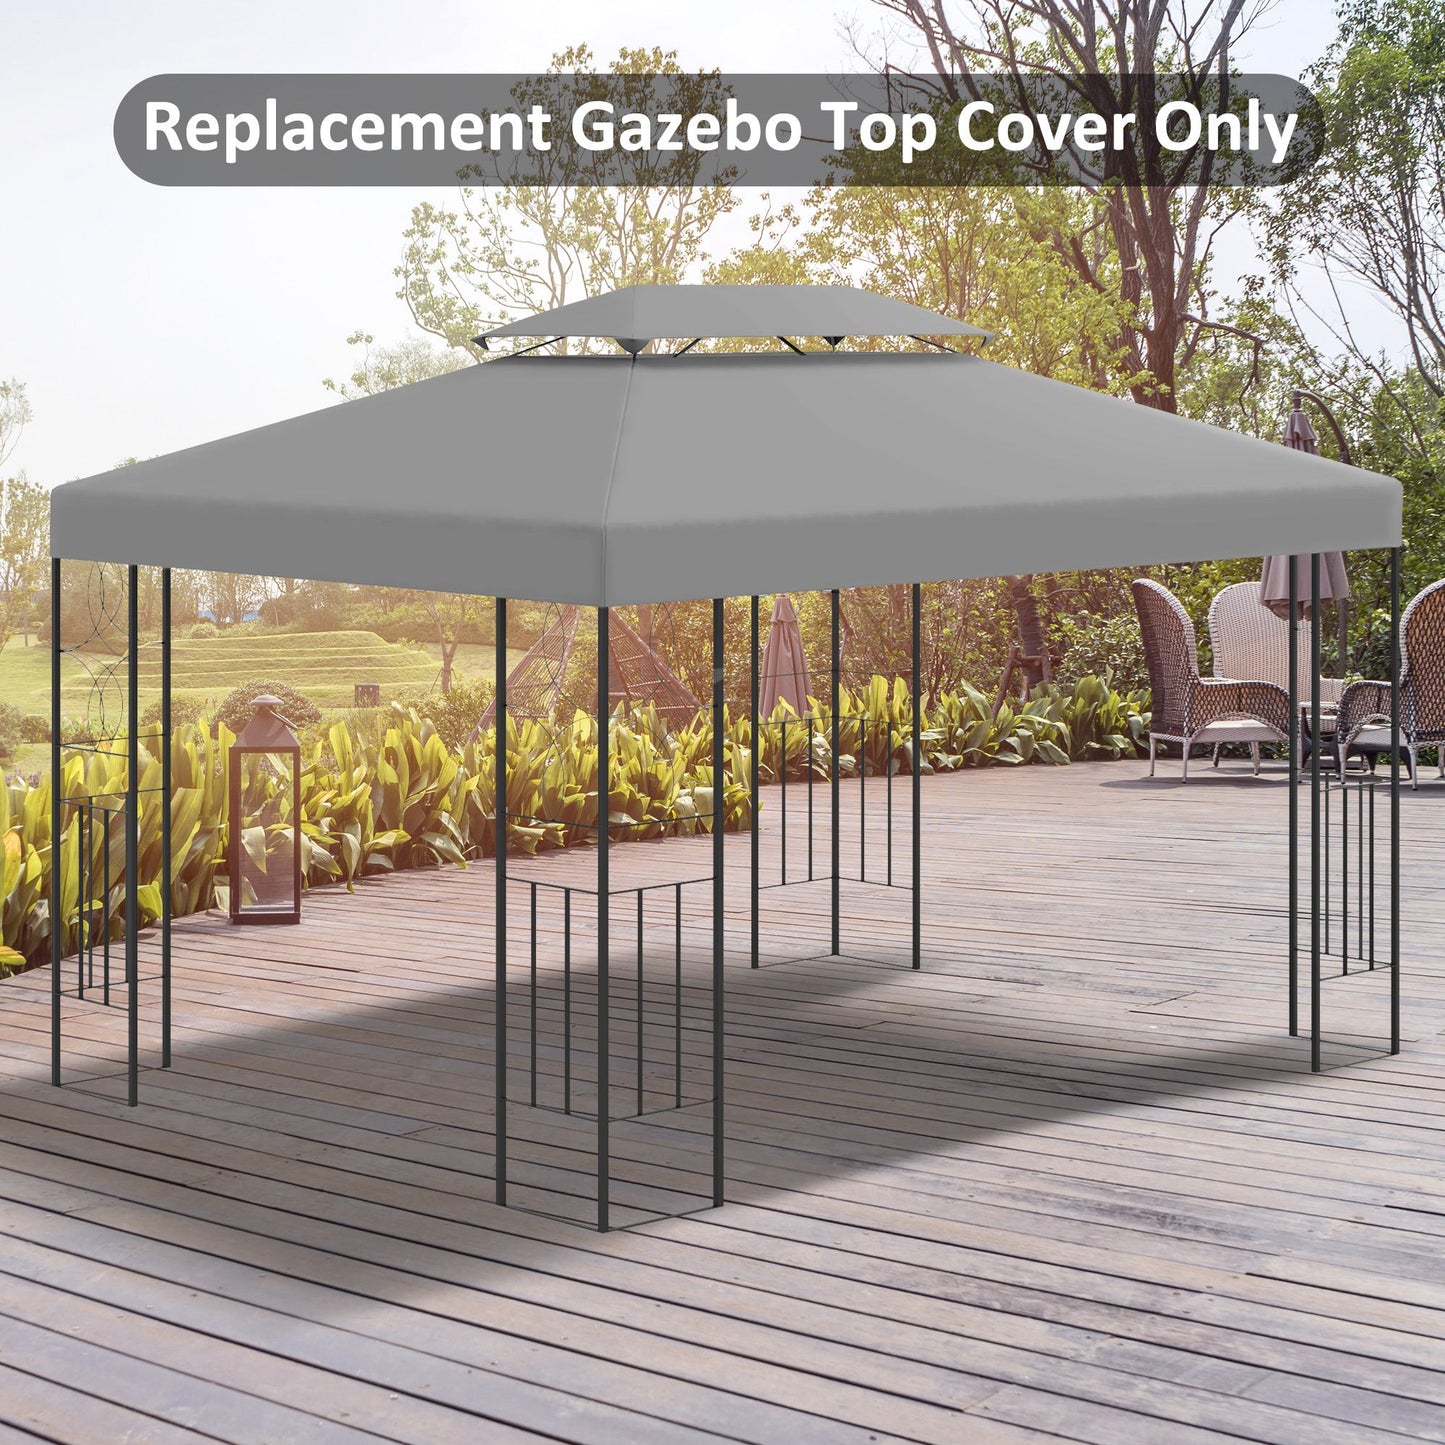 Outsunny 3x4m Gazebo Replacement Roof Canopy 2 Tier Top UV Cover Garden Patio Light Grey